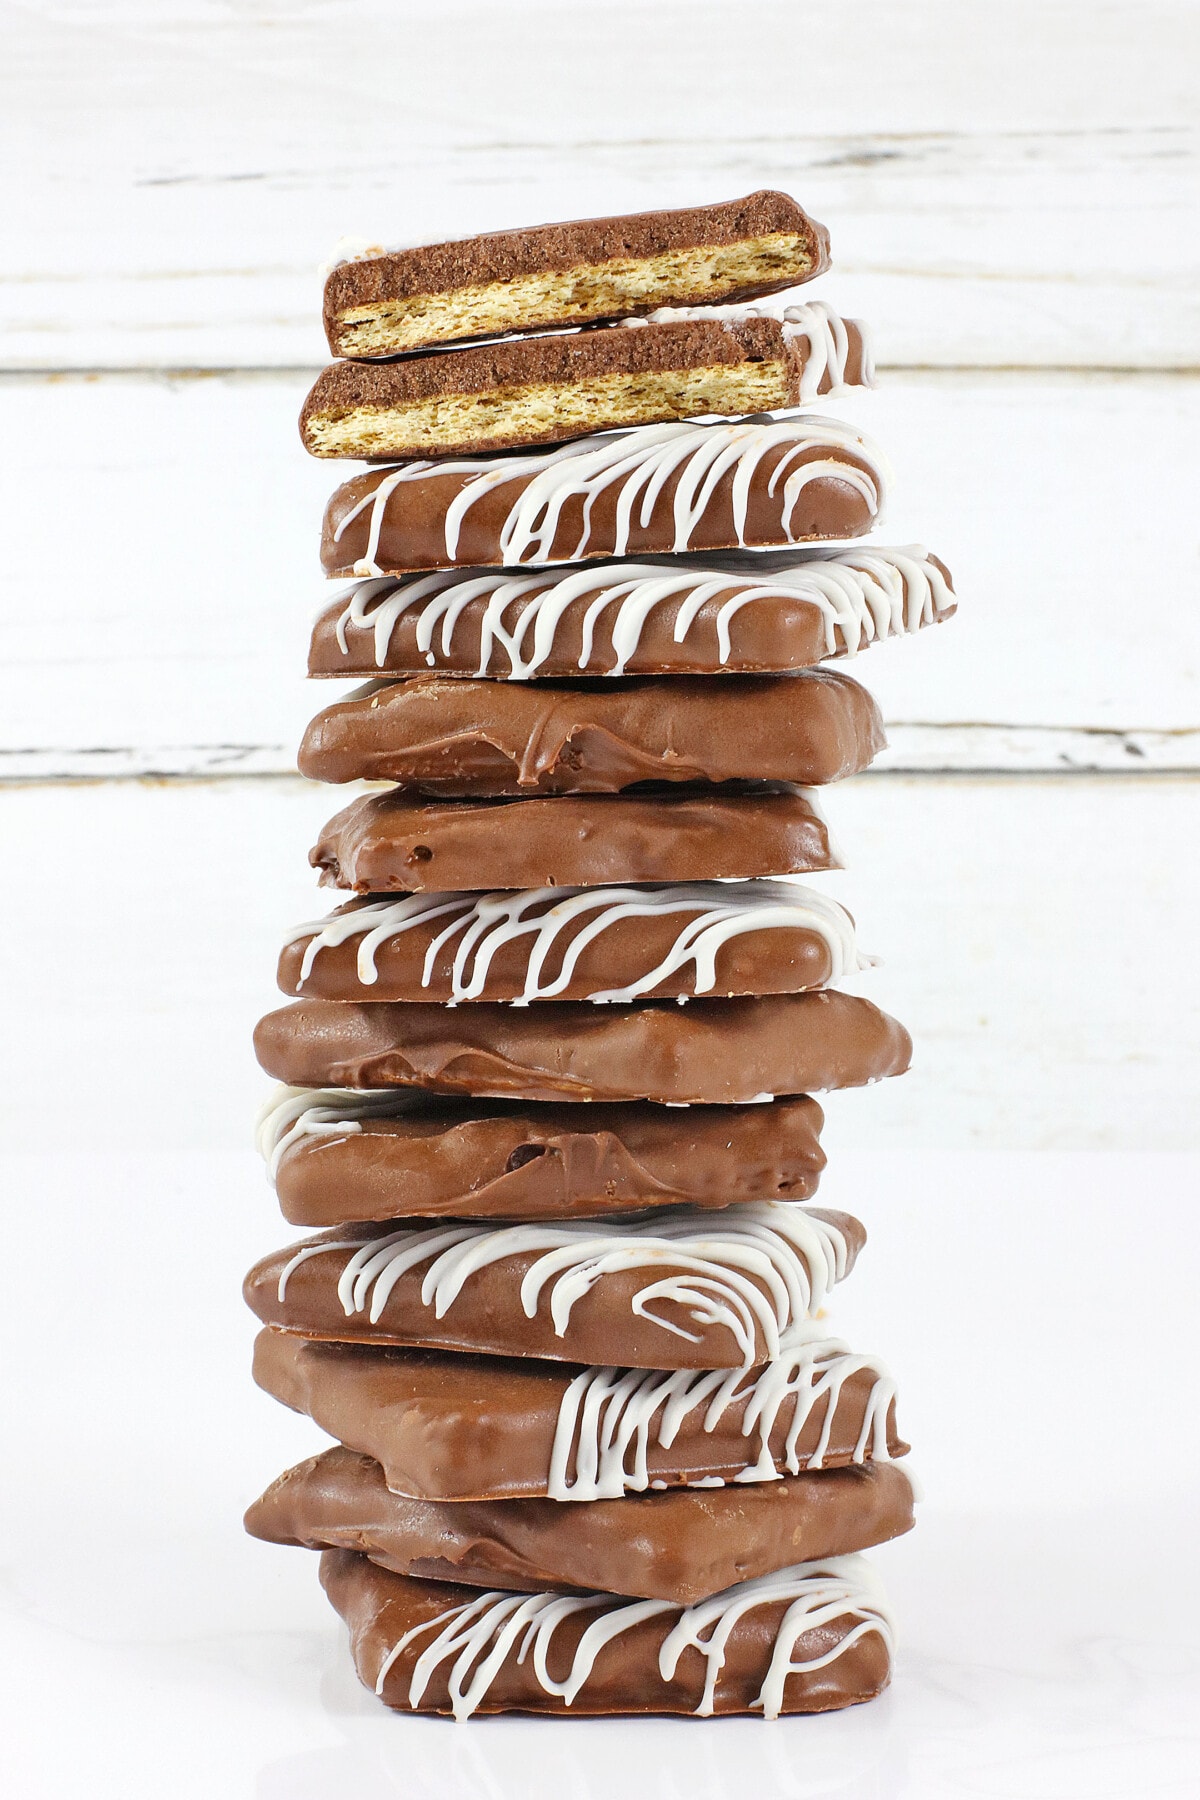 A large stack of Chocolate-Covered Graham Crackers.